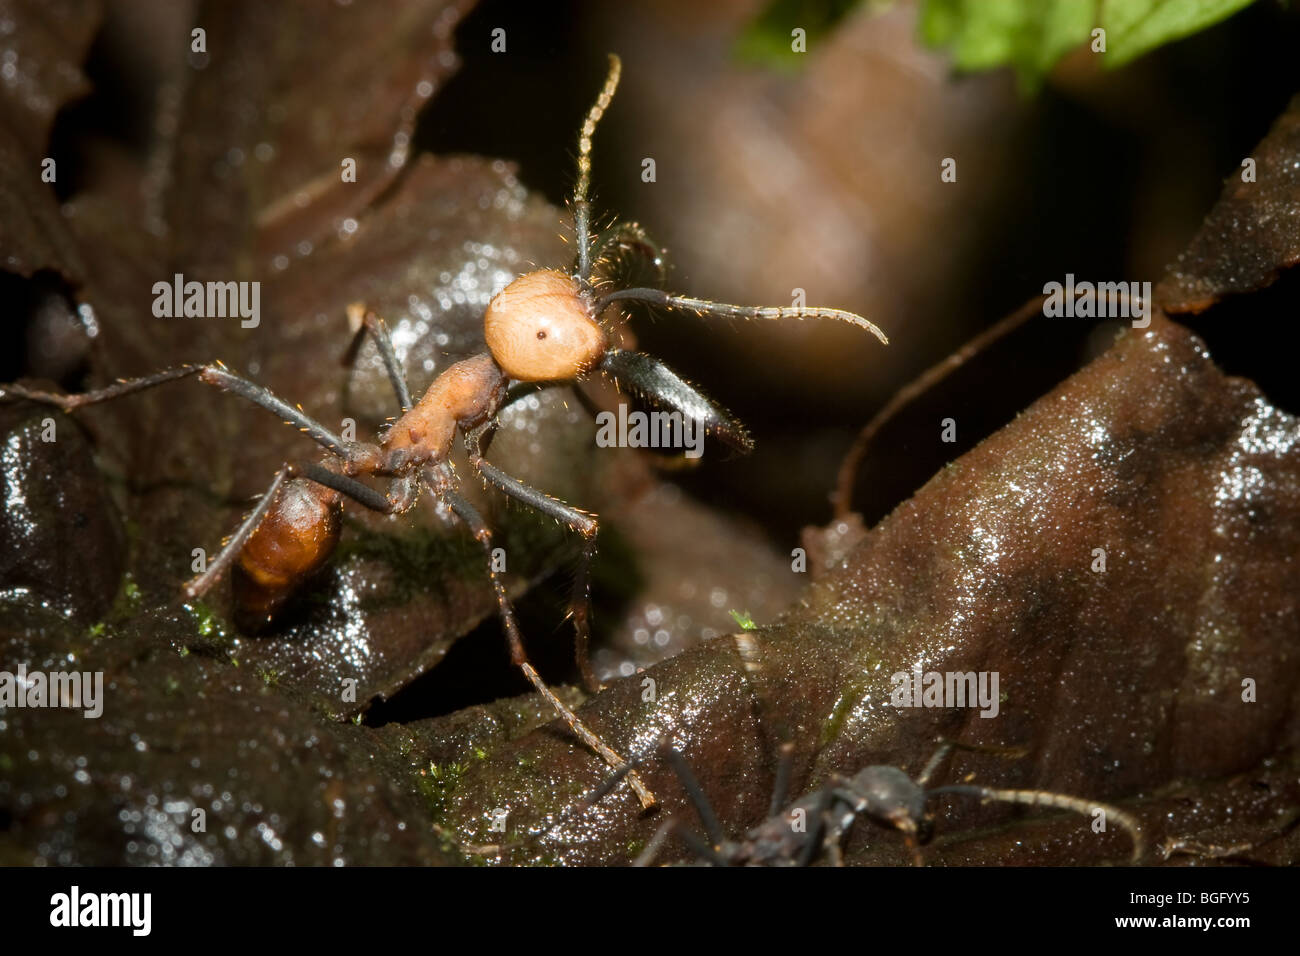 An army ant soldier bares its formidable jaws. Order Hymenoptera, family Formicidae. Photographed in Costa Rica. Stock Photo